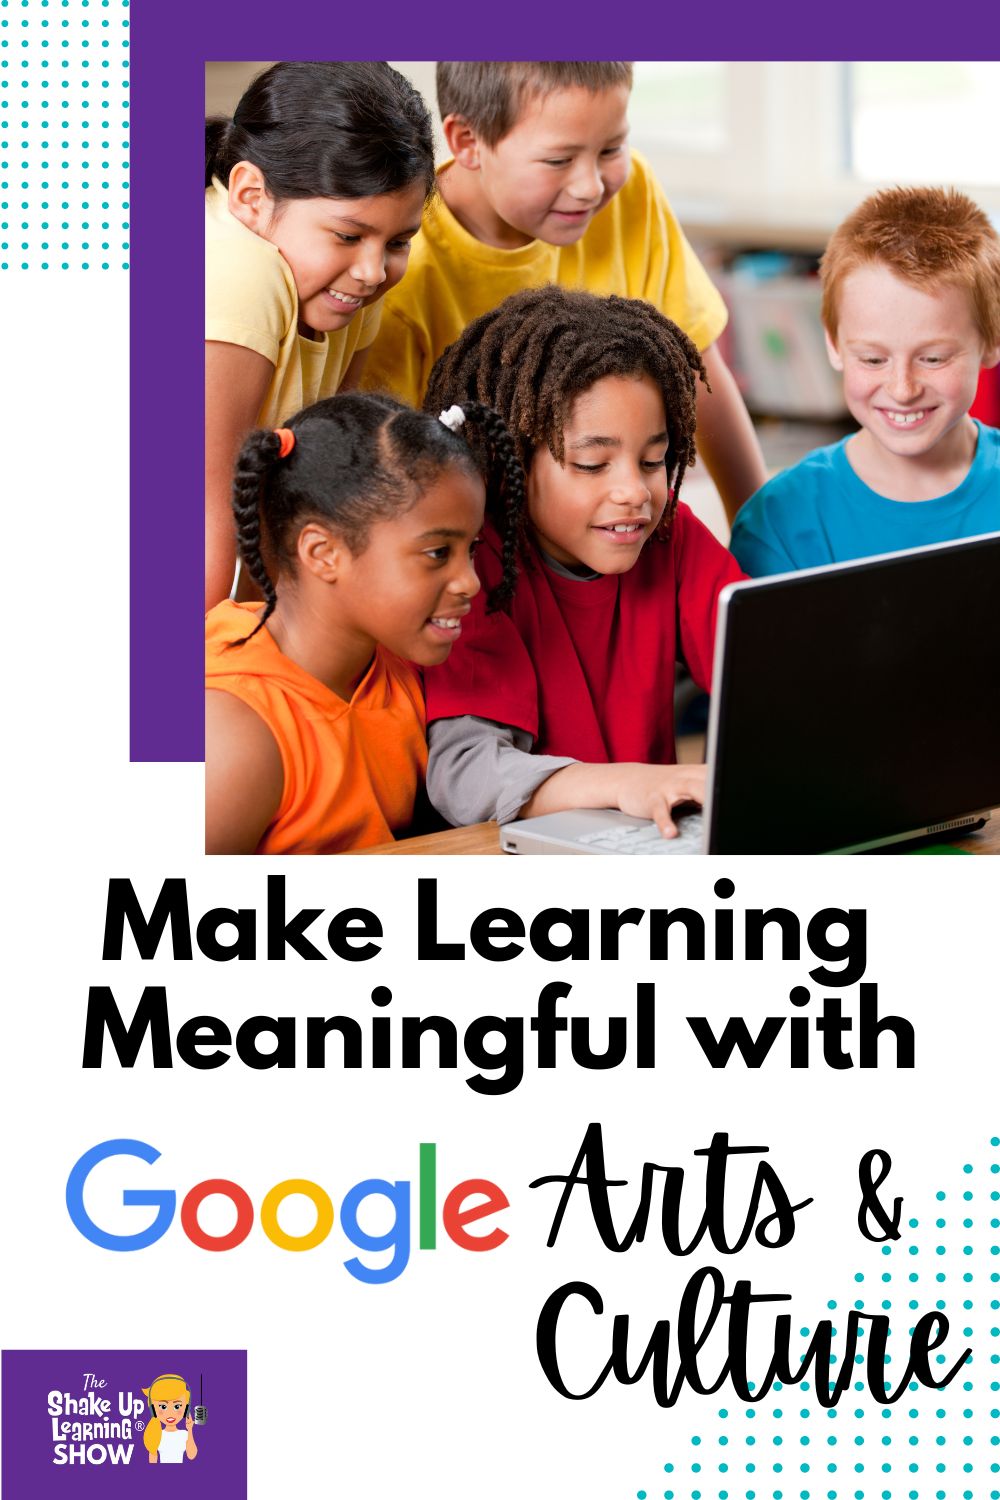 Make Learning Meaningful with Google Arts and Culture –
SULS0174